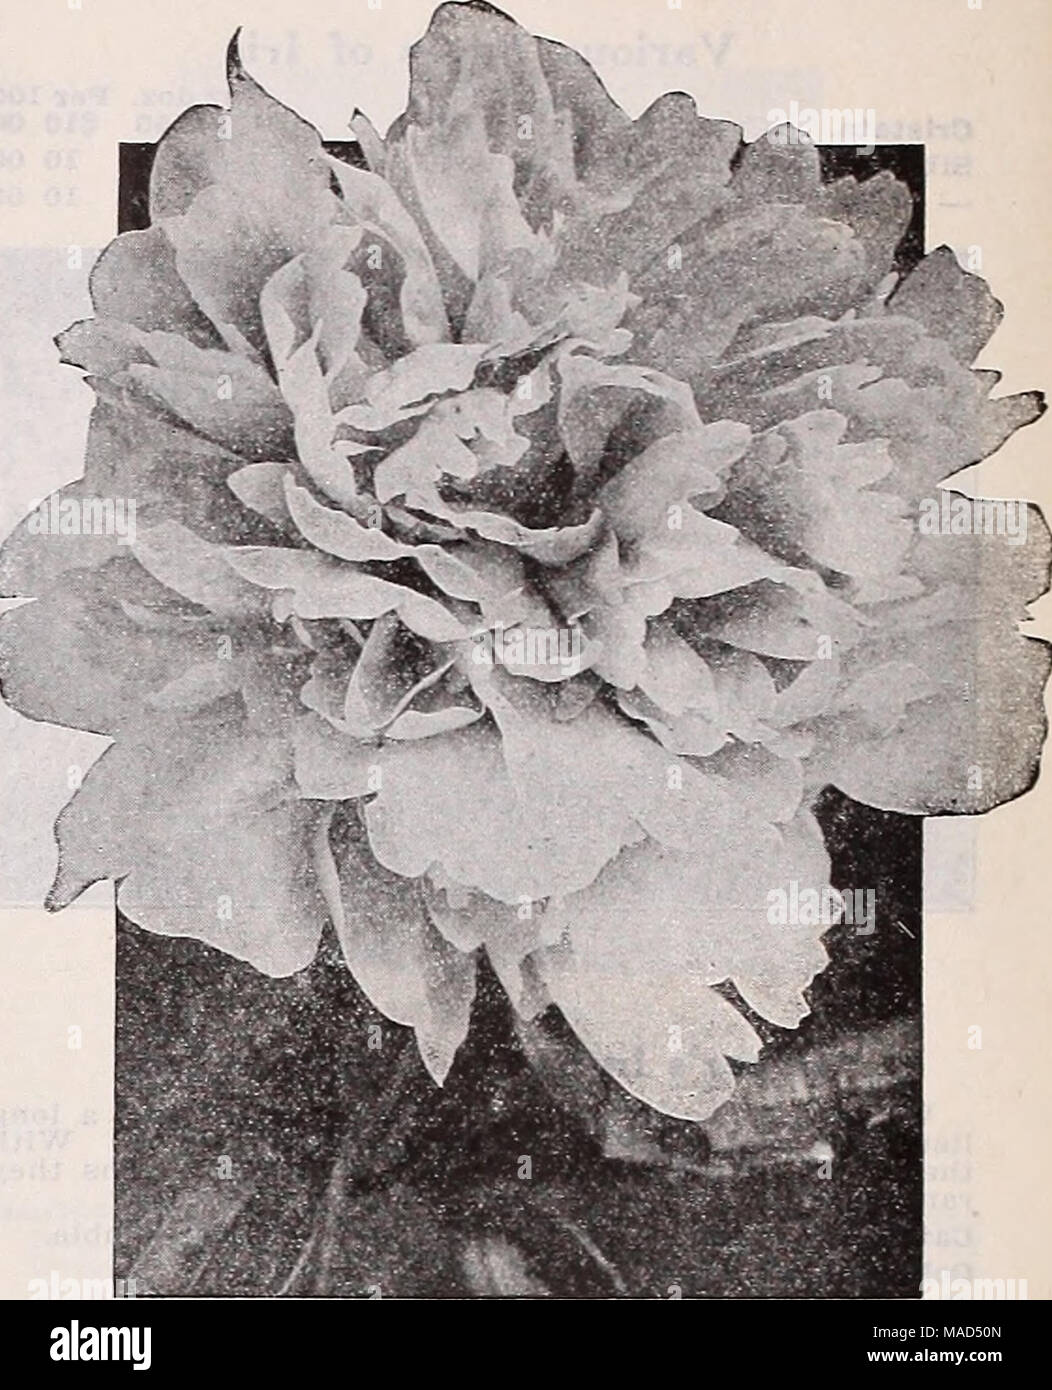 . Dreer's wholesale catalog for florists and market gardeners : 1939 winter spring summer . Double Herbaceous Peony Double Herbaceous Peonies (Strong1 Divisions, 3 to 5 Byes) Avalanche (Tall, Midseason). A valuable variety, with very large creamy white flowers of superb form. Baroness Schroeder (Tall, Midseason). Very large globular flowers. Flesh white passing to milk white. A strong tall grower, very free flowering, and very fragrant. One of the finest Peonies grown. Pelix Crousse (Medium, Midseason). Its large globular flowers, solid and compactly built, are of a rich bril- liant dazzling r Stock Photo